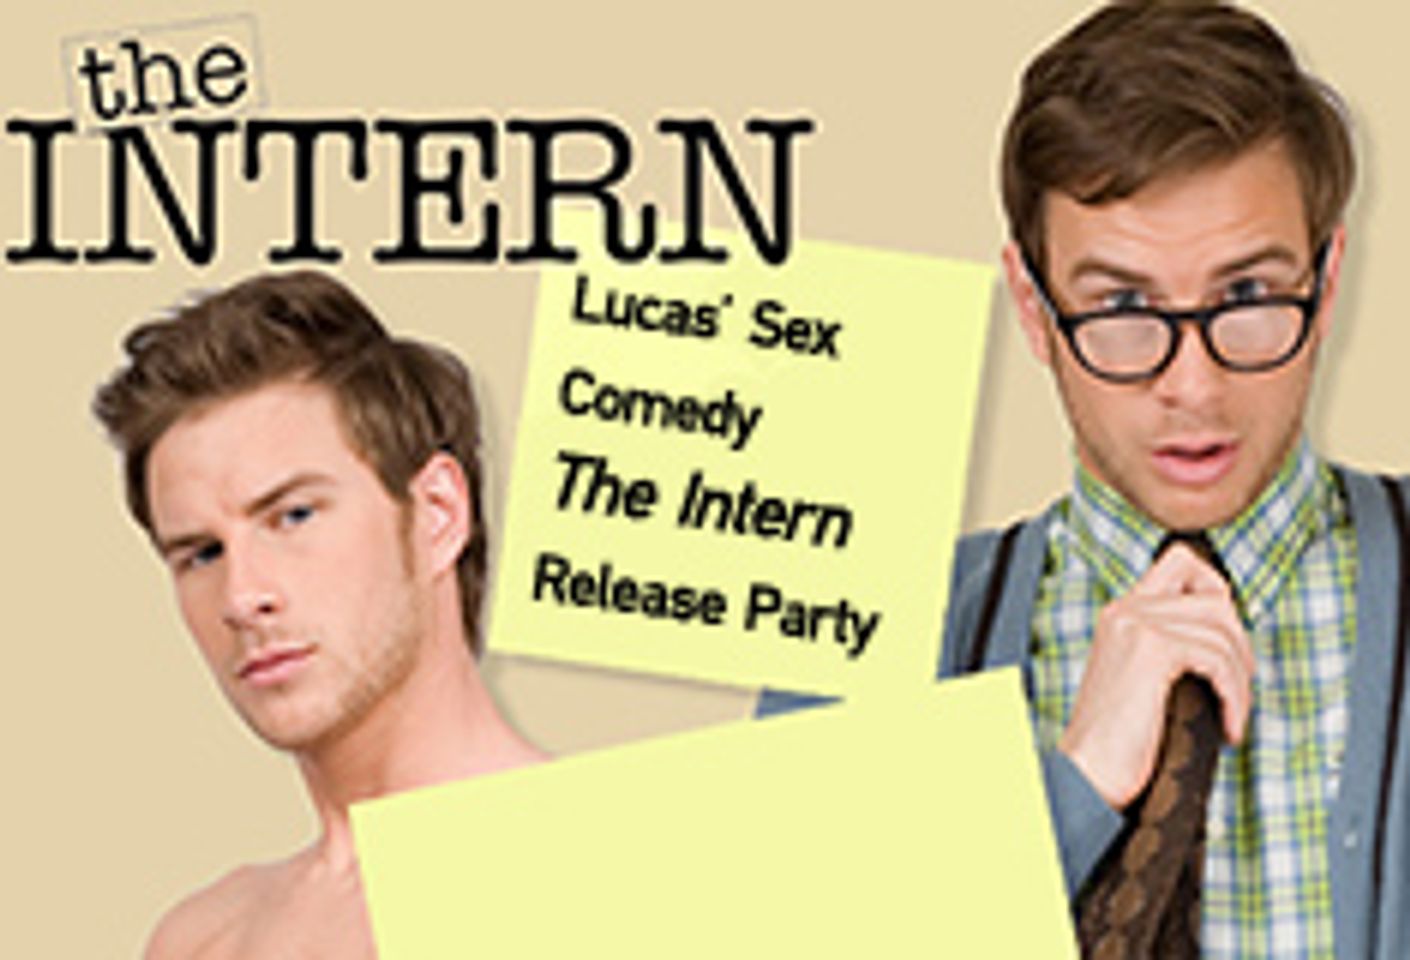 Lucas Plans Virgin Signing and Party for Intern